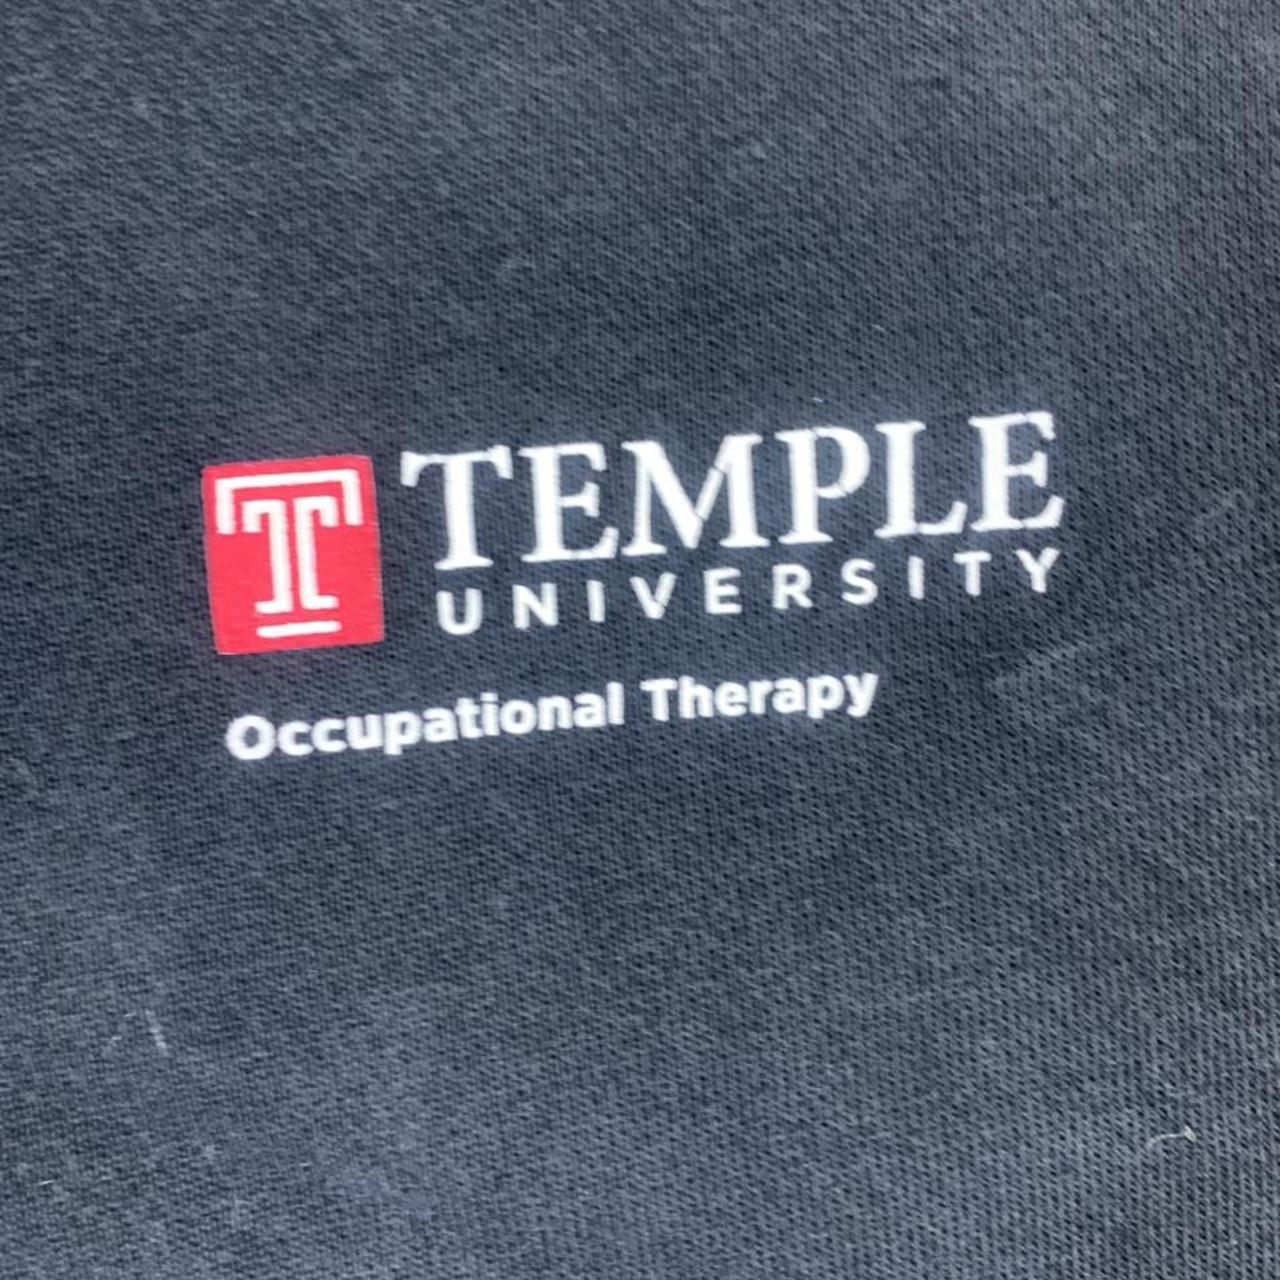 Product Image 2 - American Vintage TEMPLE UNIVERISTY Printed